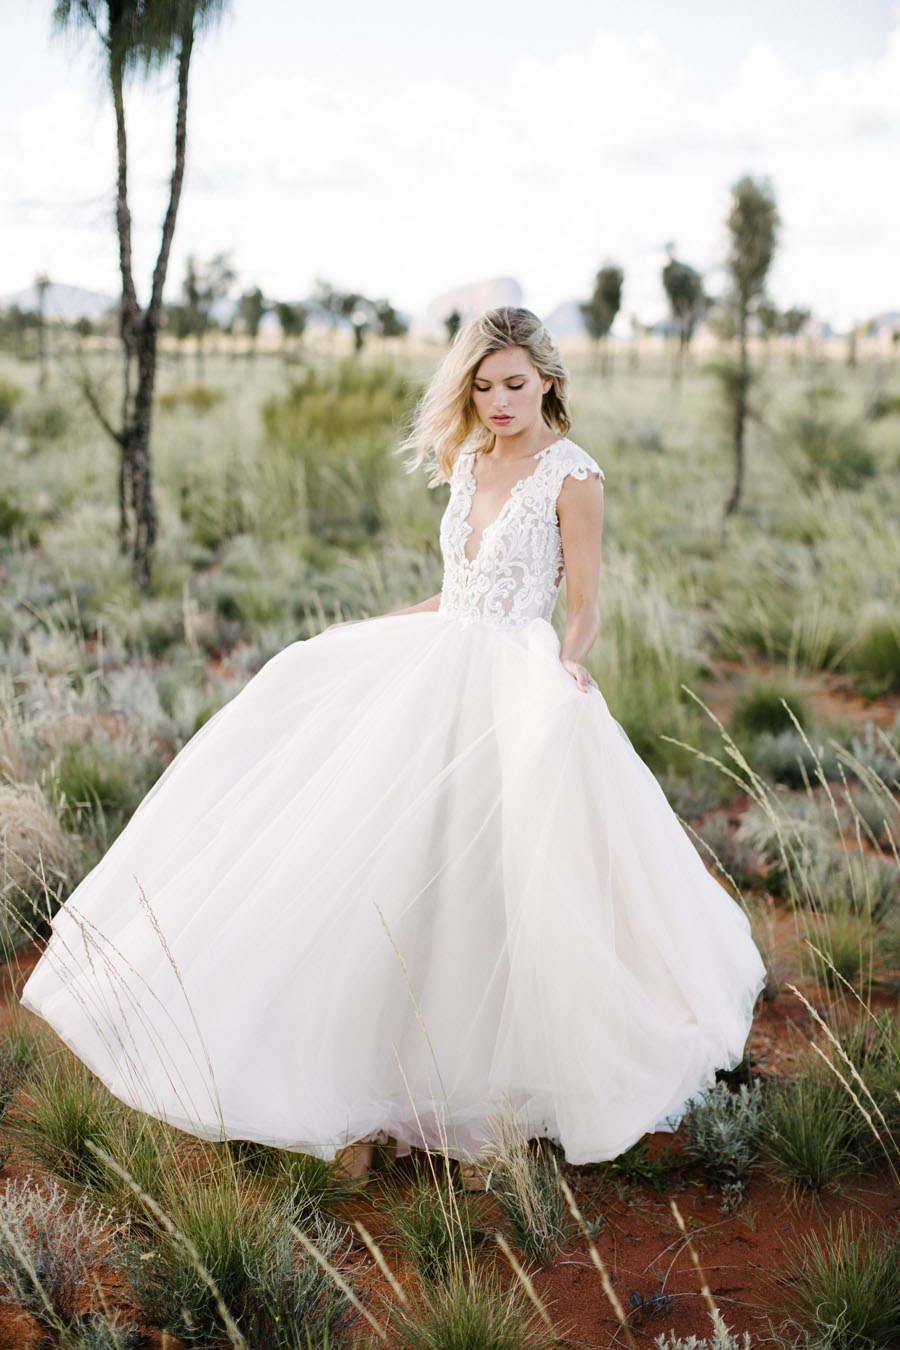 Luxury Handmade Wedding Gowns Made With Love Bridal